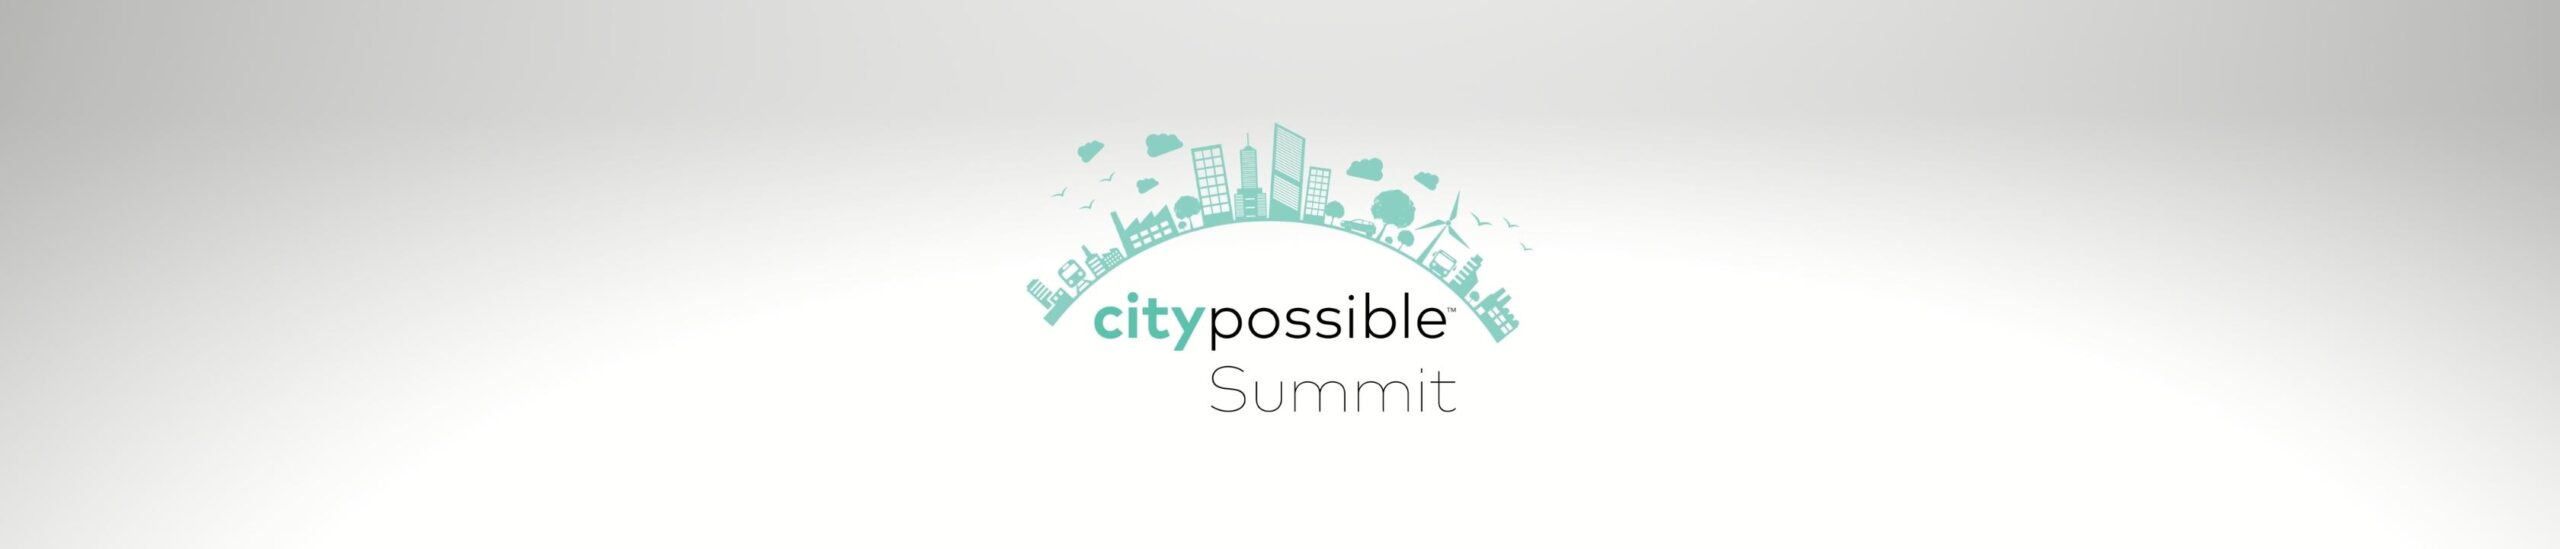 City Possible Summit 2021